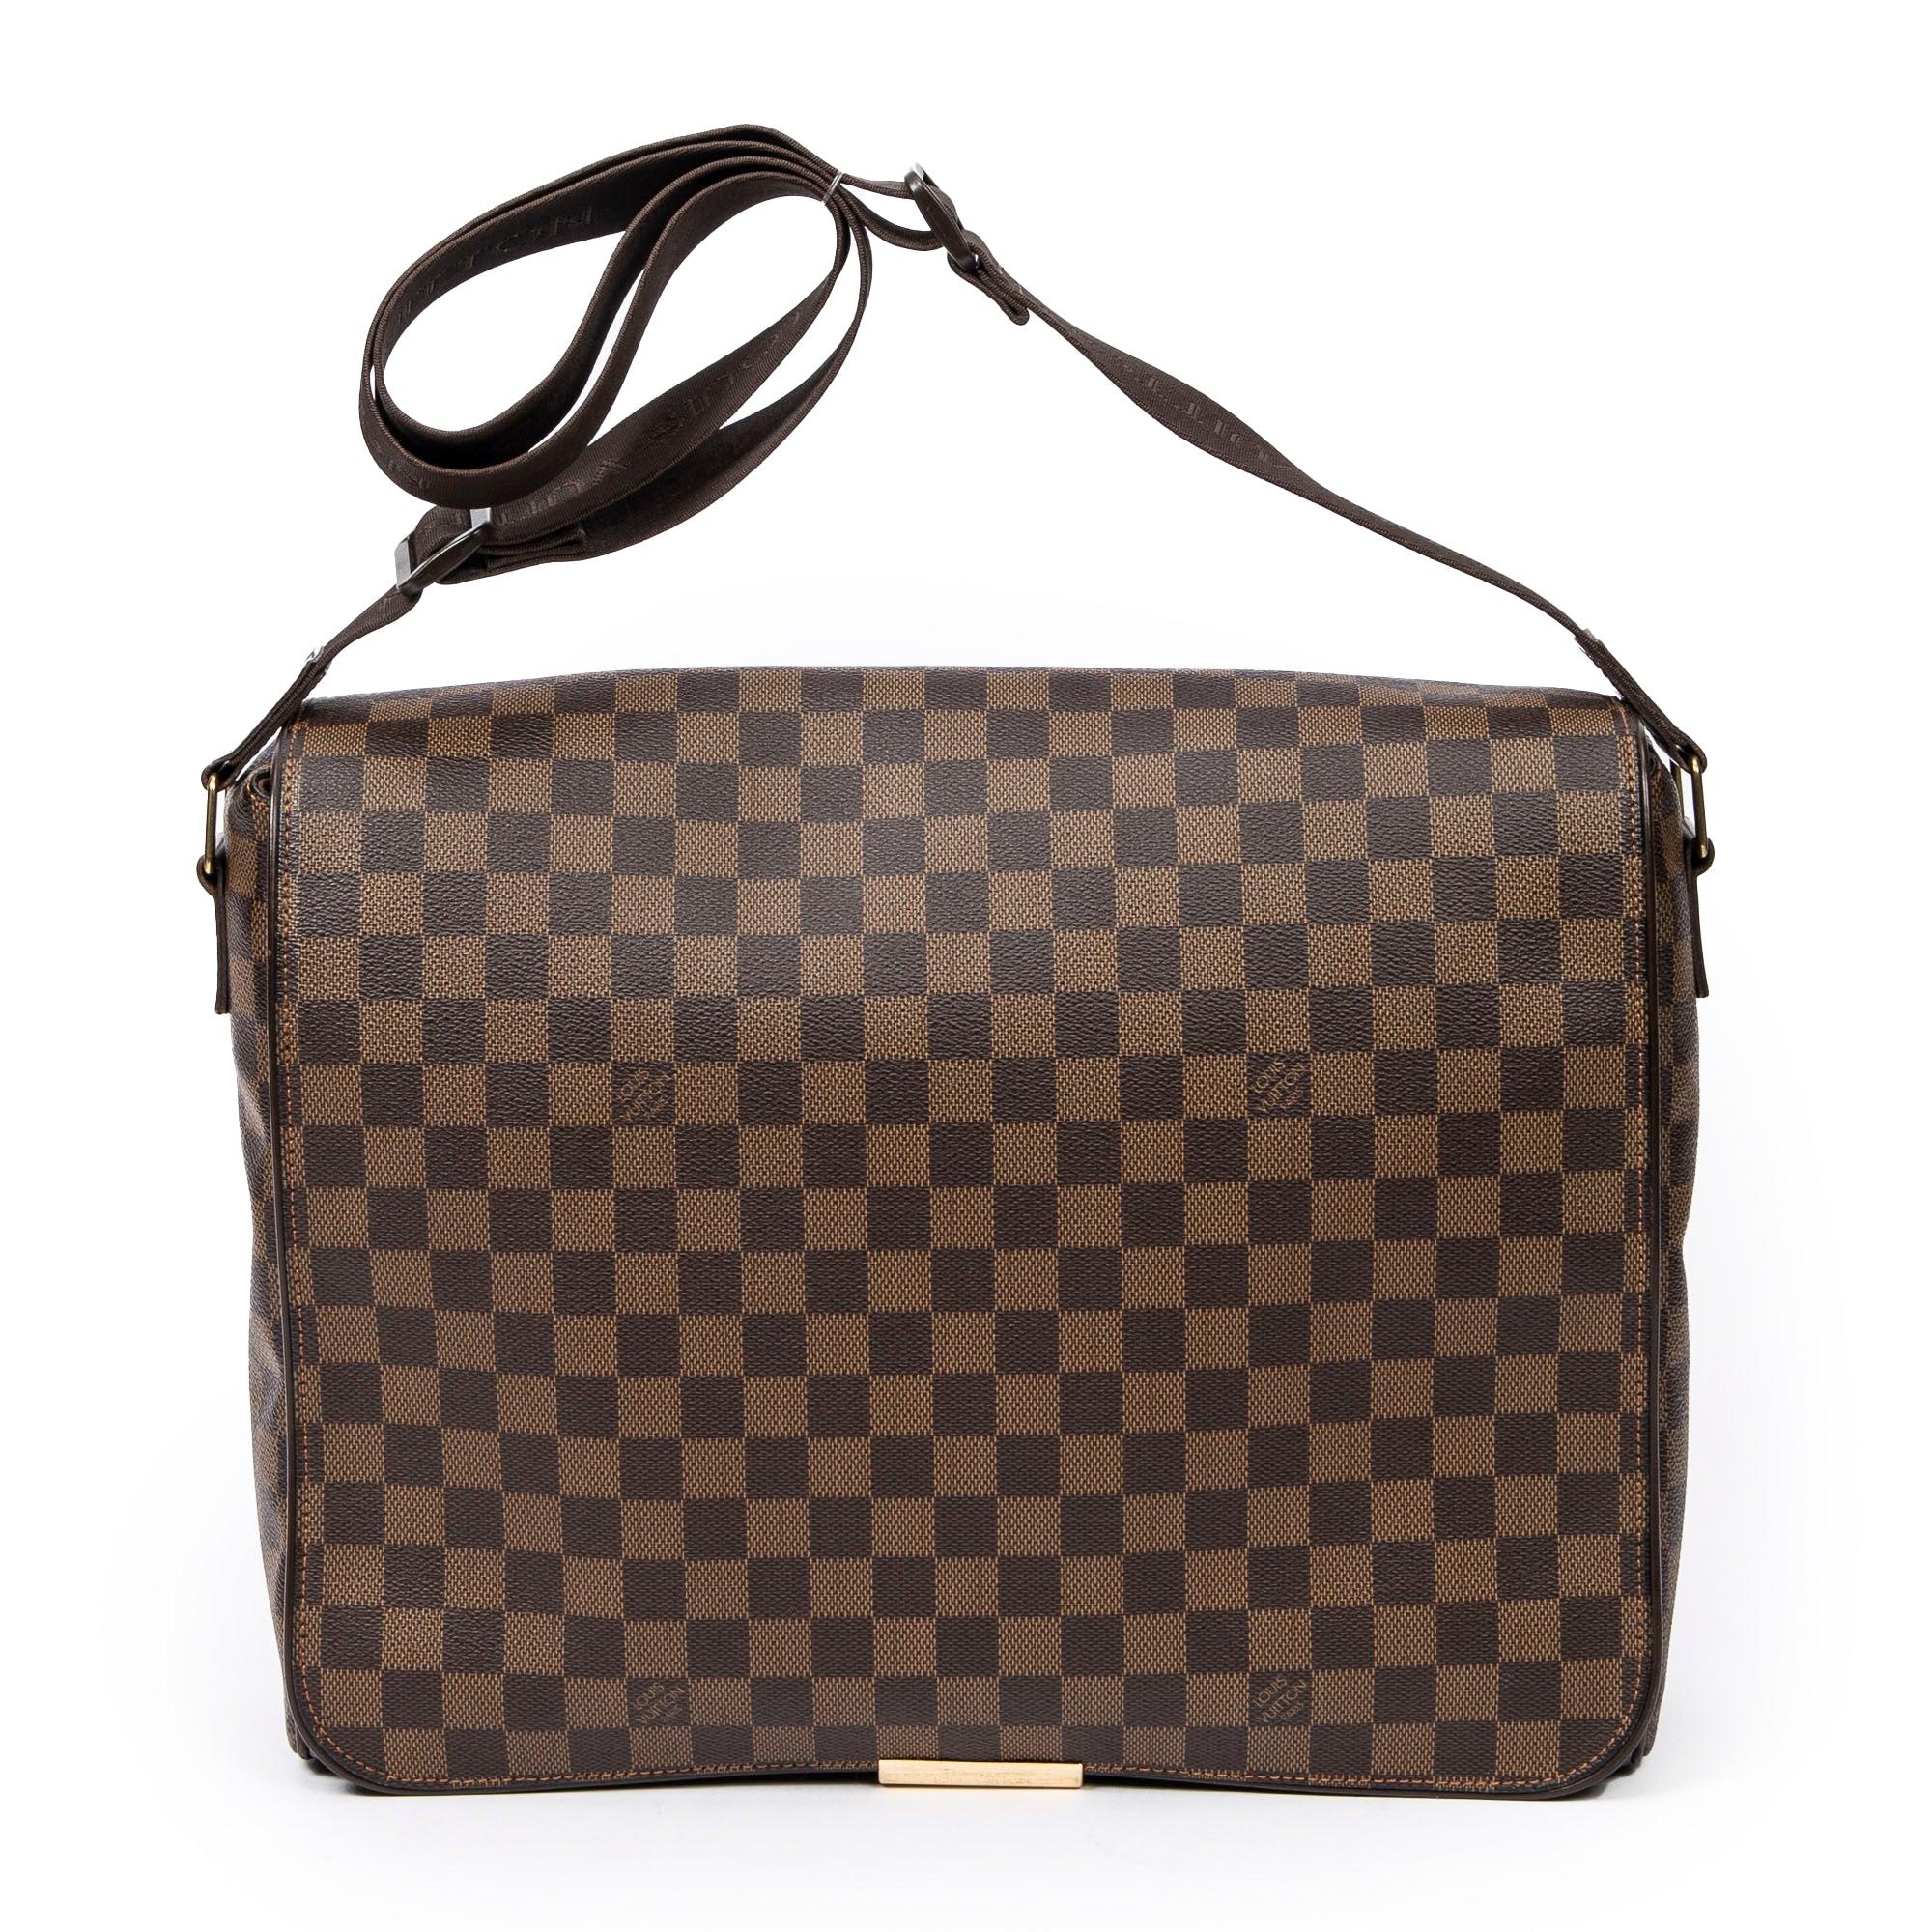 Louis Vuitton Abbesses shoulder bag in damier canvas and brown leather